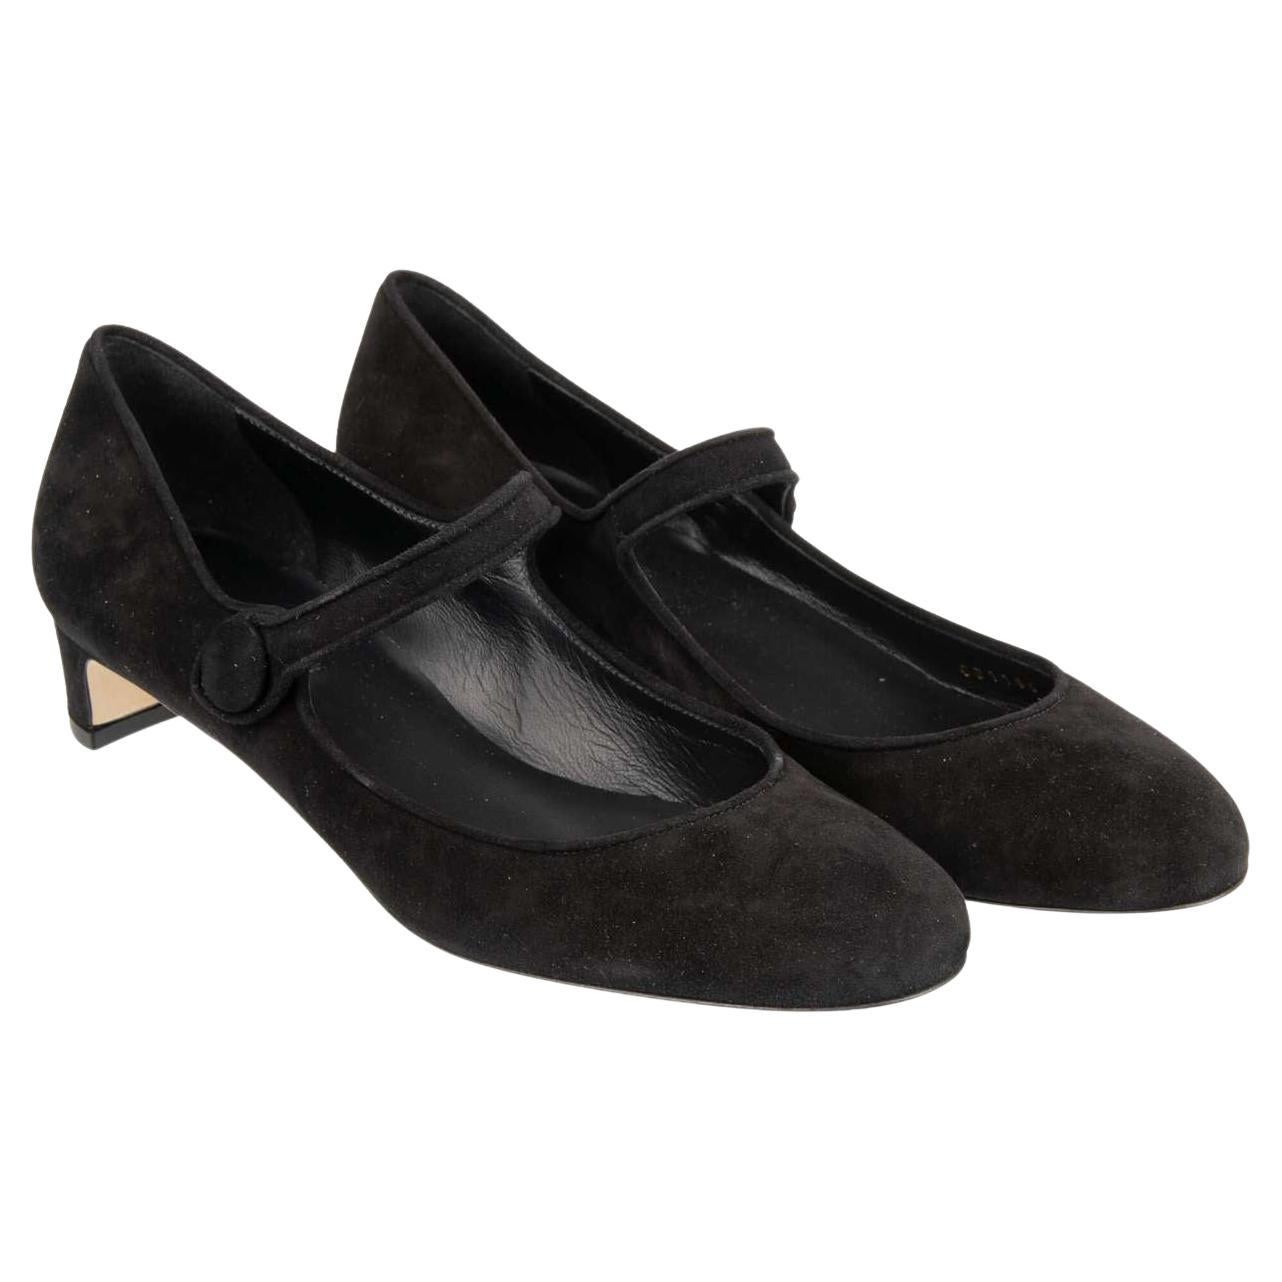 Dolce & Gabbana - Suede Leather Mary Jane Pumps VALLY Black EUR 37 For Sale